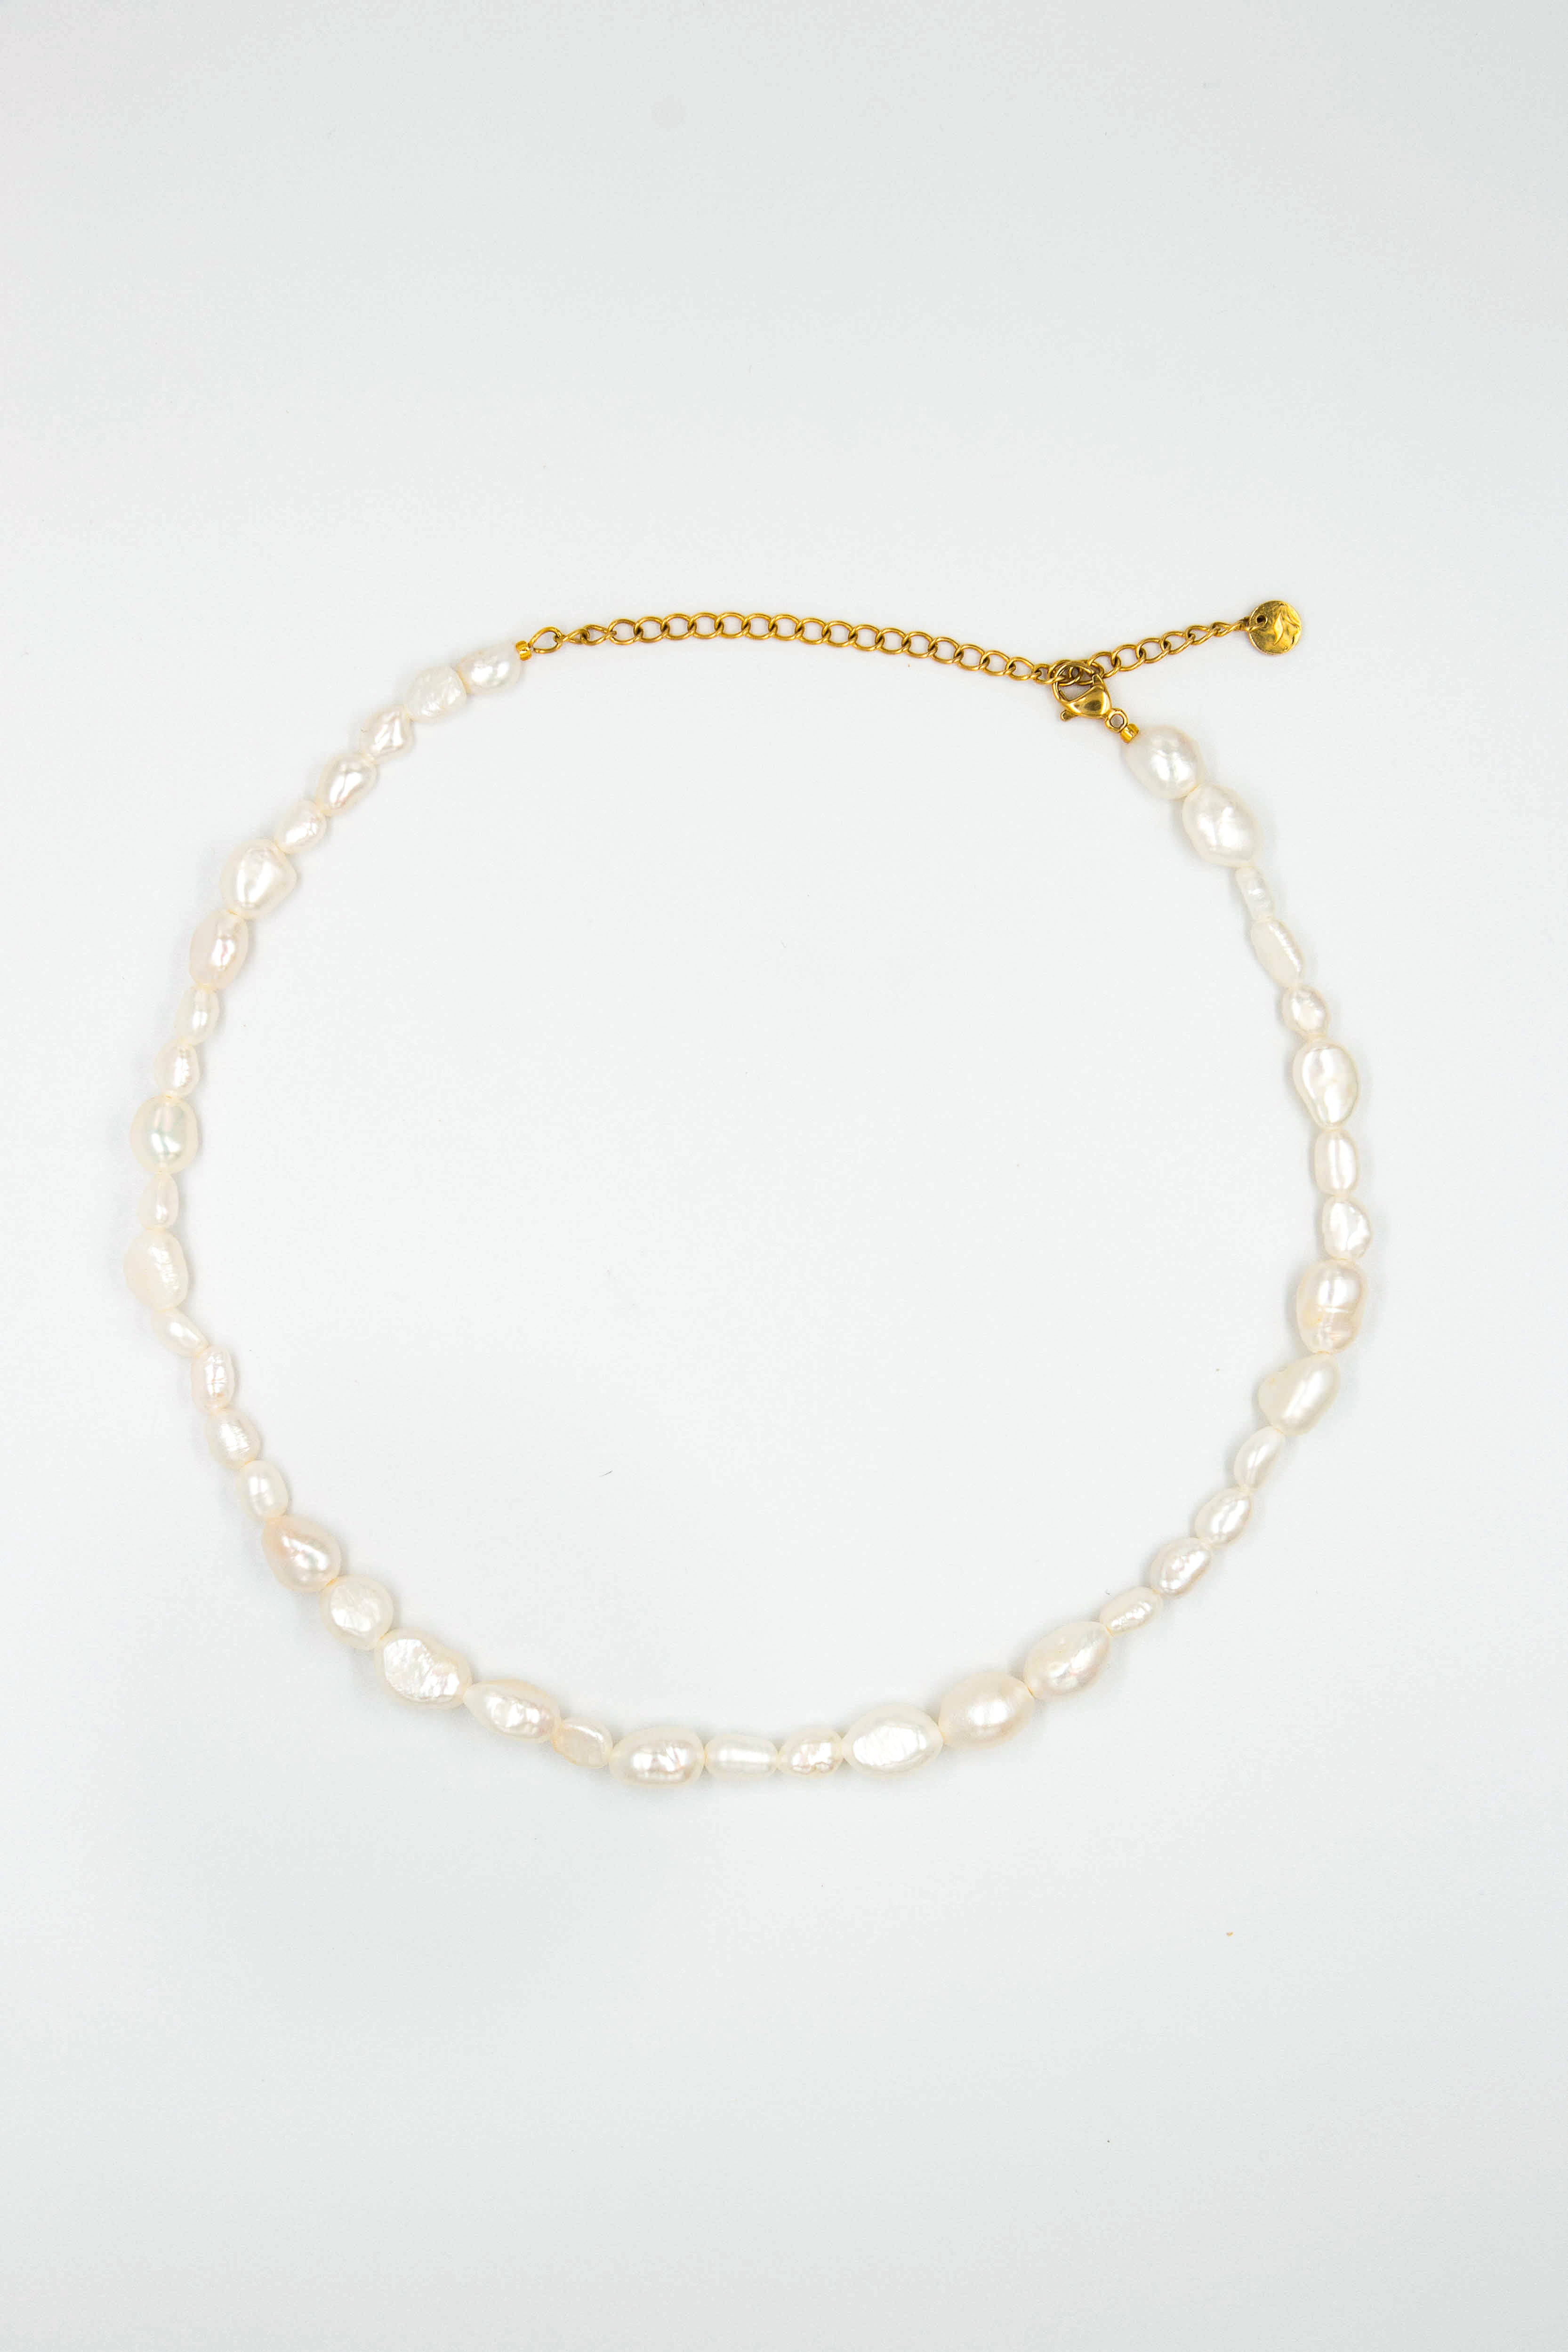 Chunky Pearl Necklace - caliorjewelry